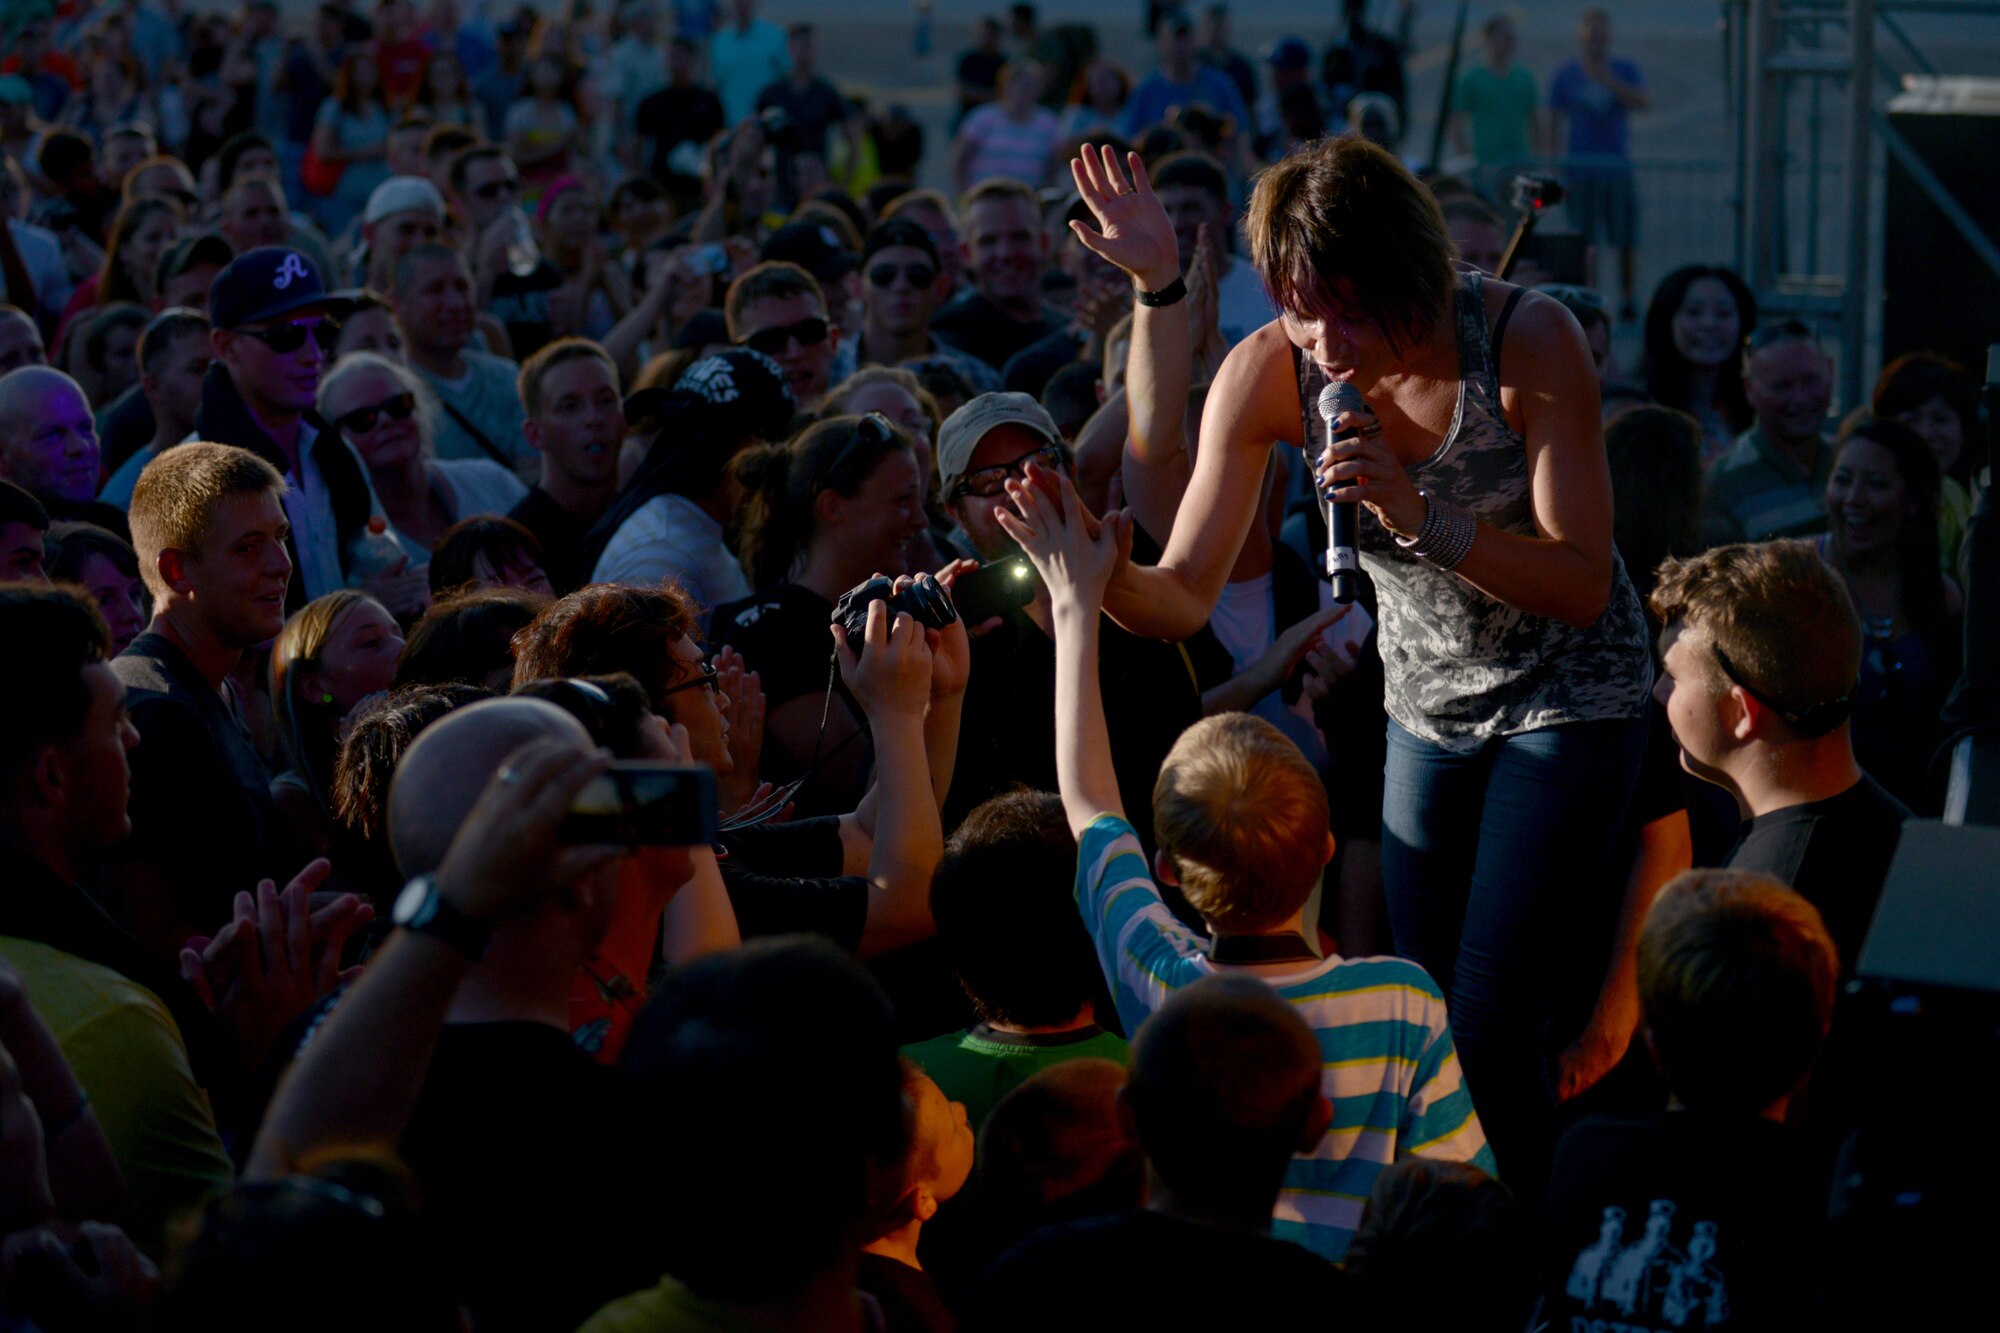 Molly Callinan, vocalist with the Lt. Dan Band, gets down with the crowd during her performance on U.S. Marine Corps Air Station Futenma, Japan, July 6, 2013. This was the Lt. Dan Band's last show on their USO tour of Pacific bases. (U.S. Air Force photo by Tech. Sgt. Jocelyn Rich-Pendracki/Released)